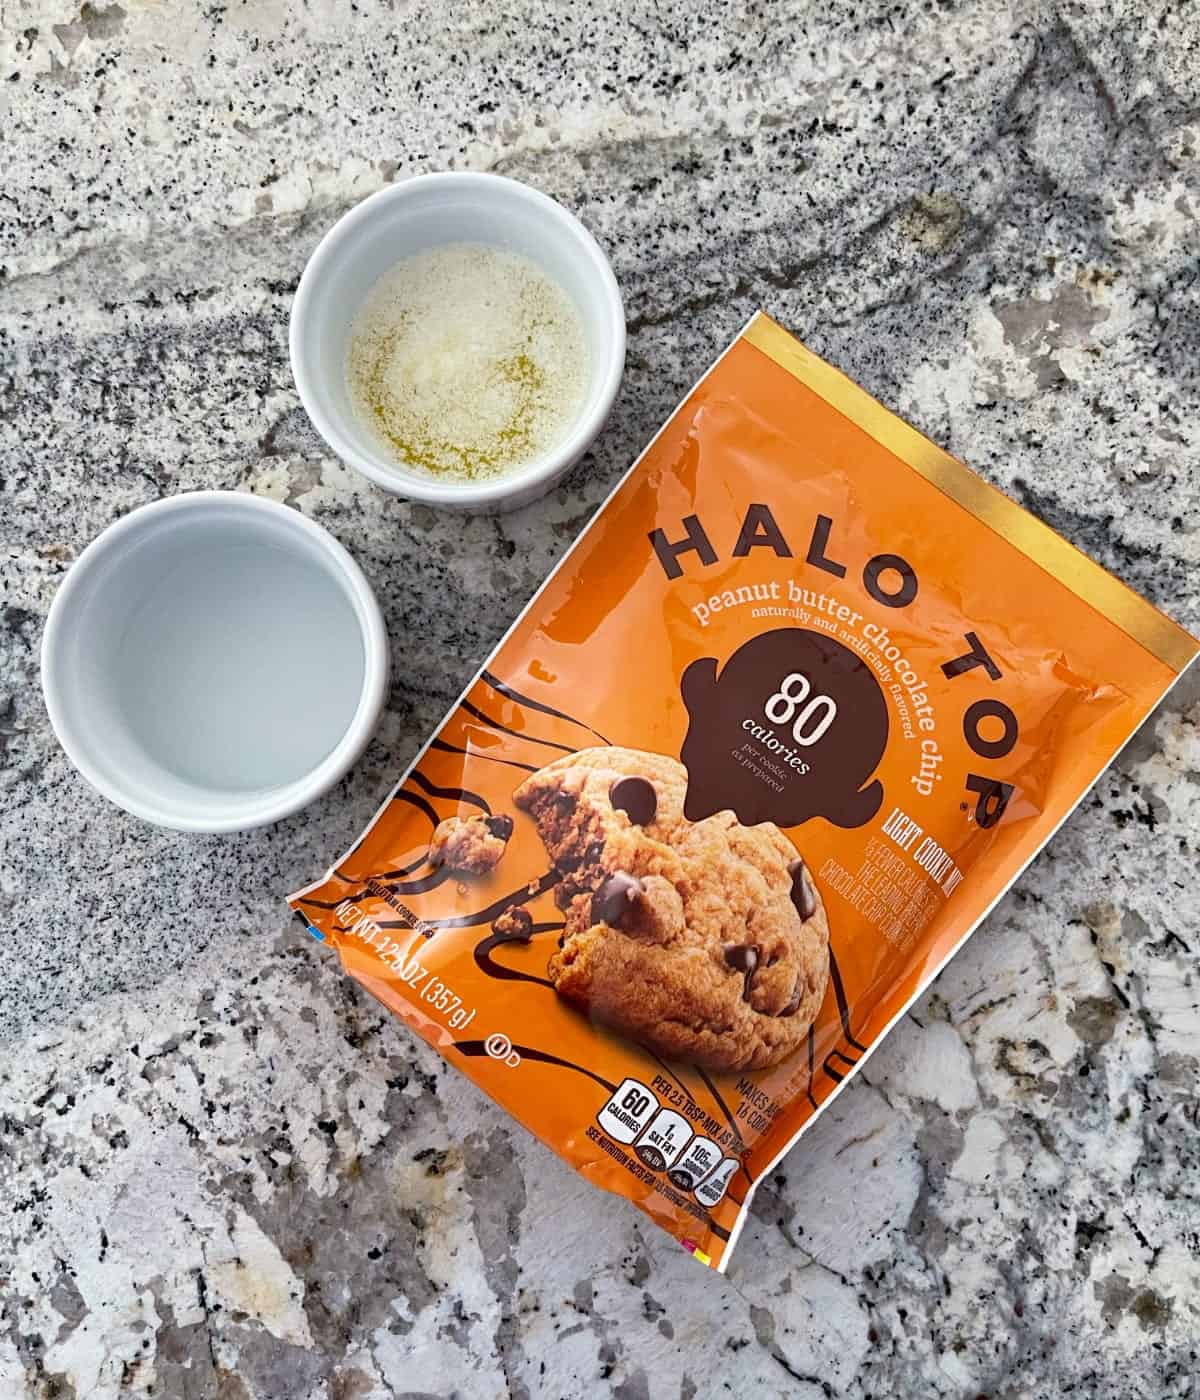 Package of Halo Top Peanut Butter Chocolate Chip Light Cookie Mix, a small ramekin of melted butter and small ramekin of water.